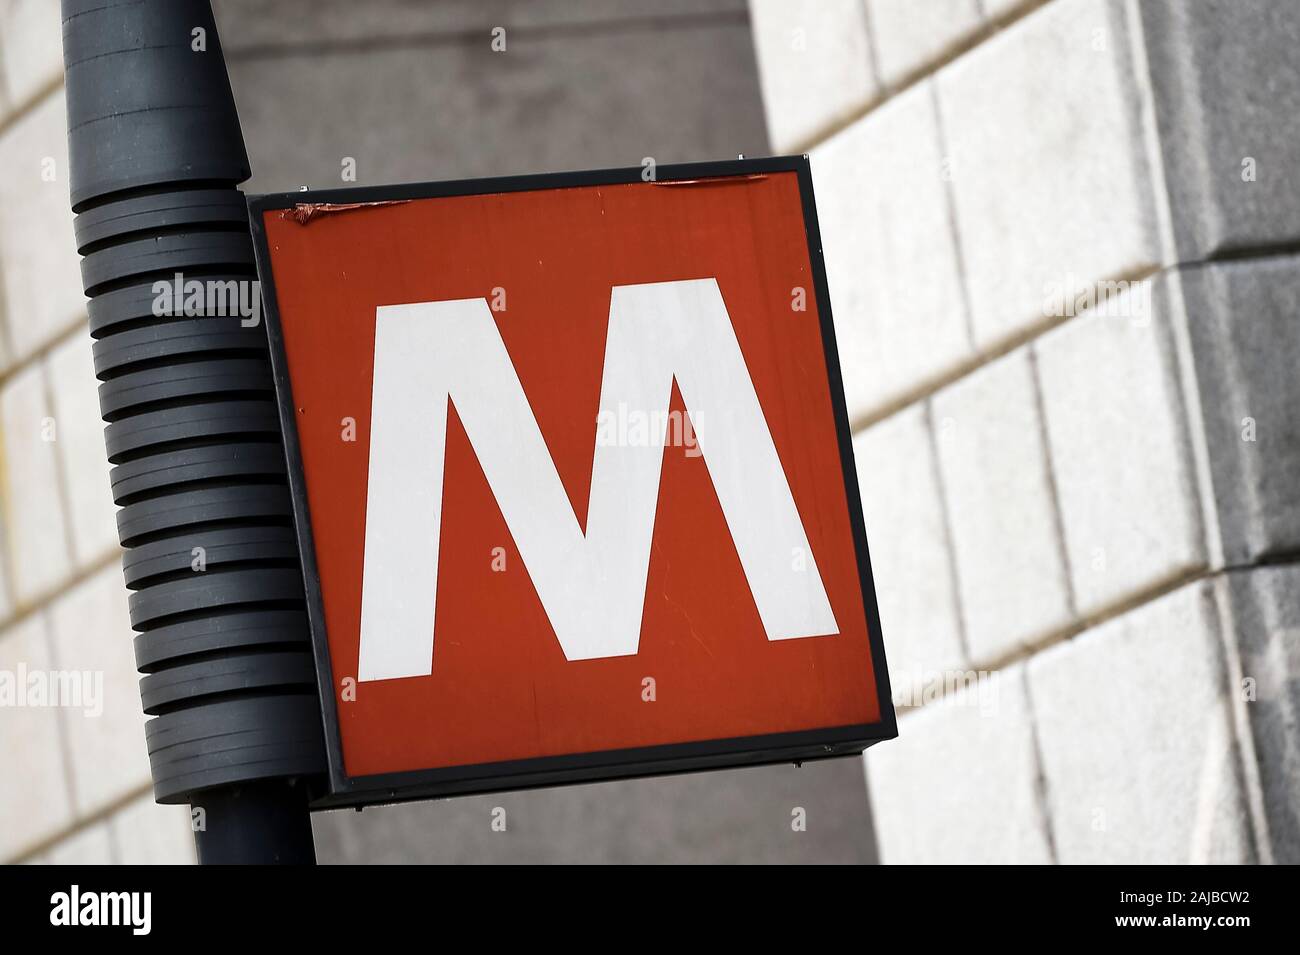 Turin, Italy - 24 July, 2019: A sign of the Turin metro reading 'M' is seen near Porta Nuova railway station.  On 24 July 2019 Italian trade unions call a strike action that affects public transport including trains, taxis, subways, buses, trams. On 26 July the protest is expected at airports, with national airline Alitalia staff and other airport workers staging strikes. Credit: Nicolò Campo/Alamy Live News Stock Photo